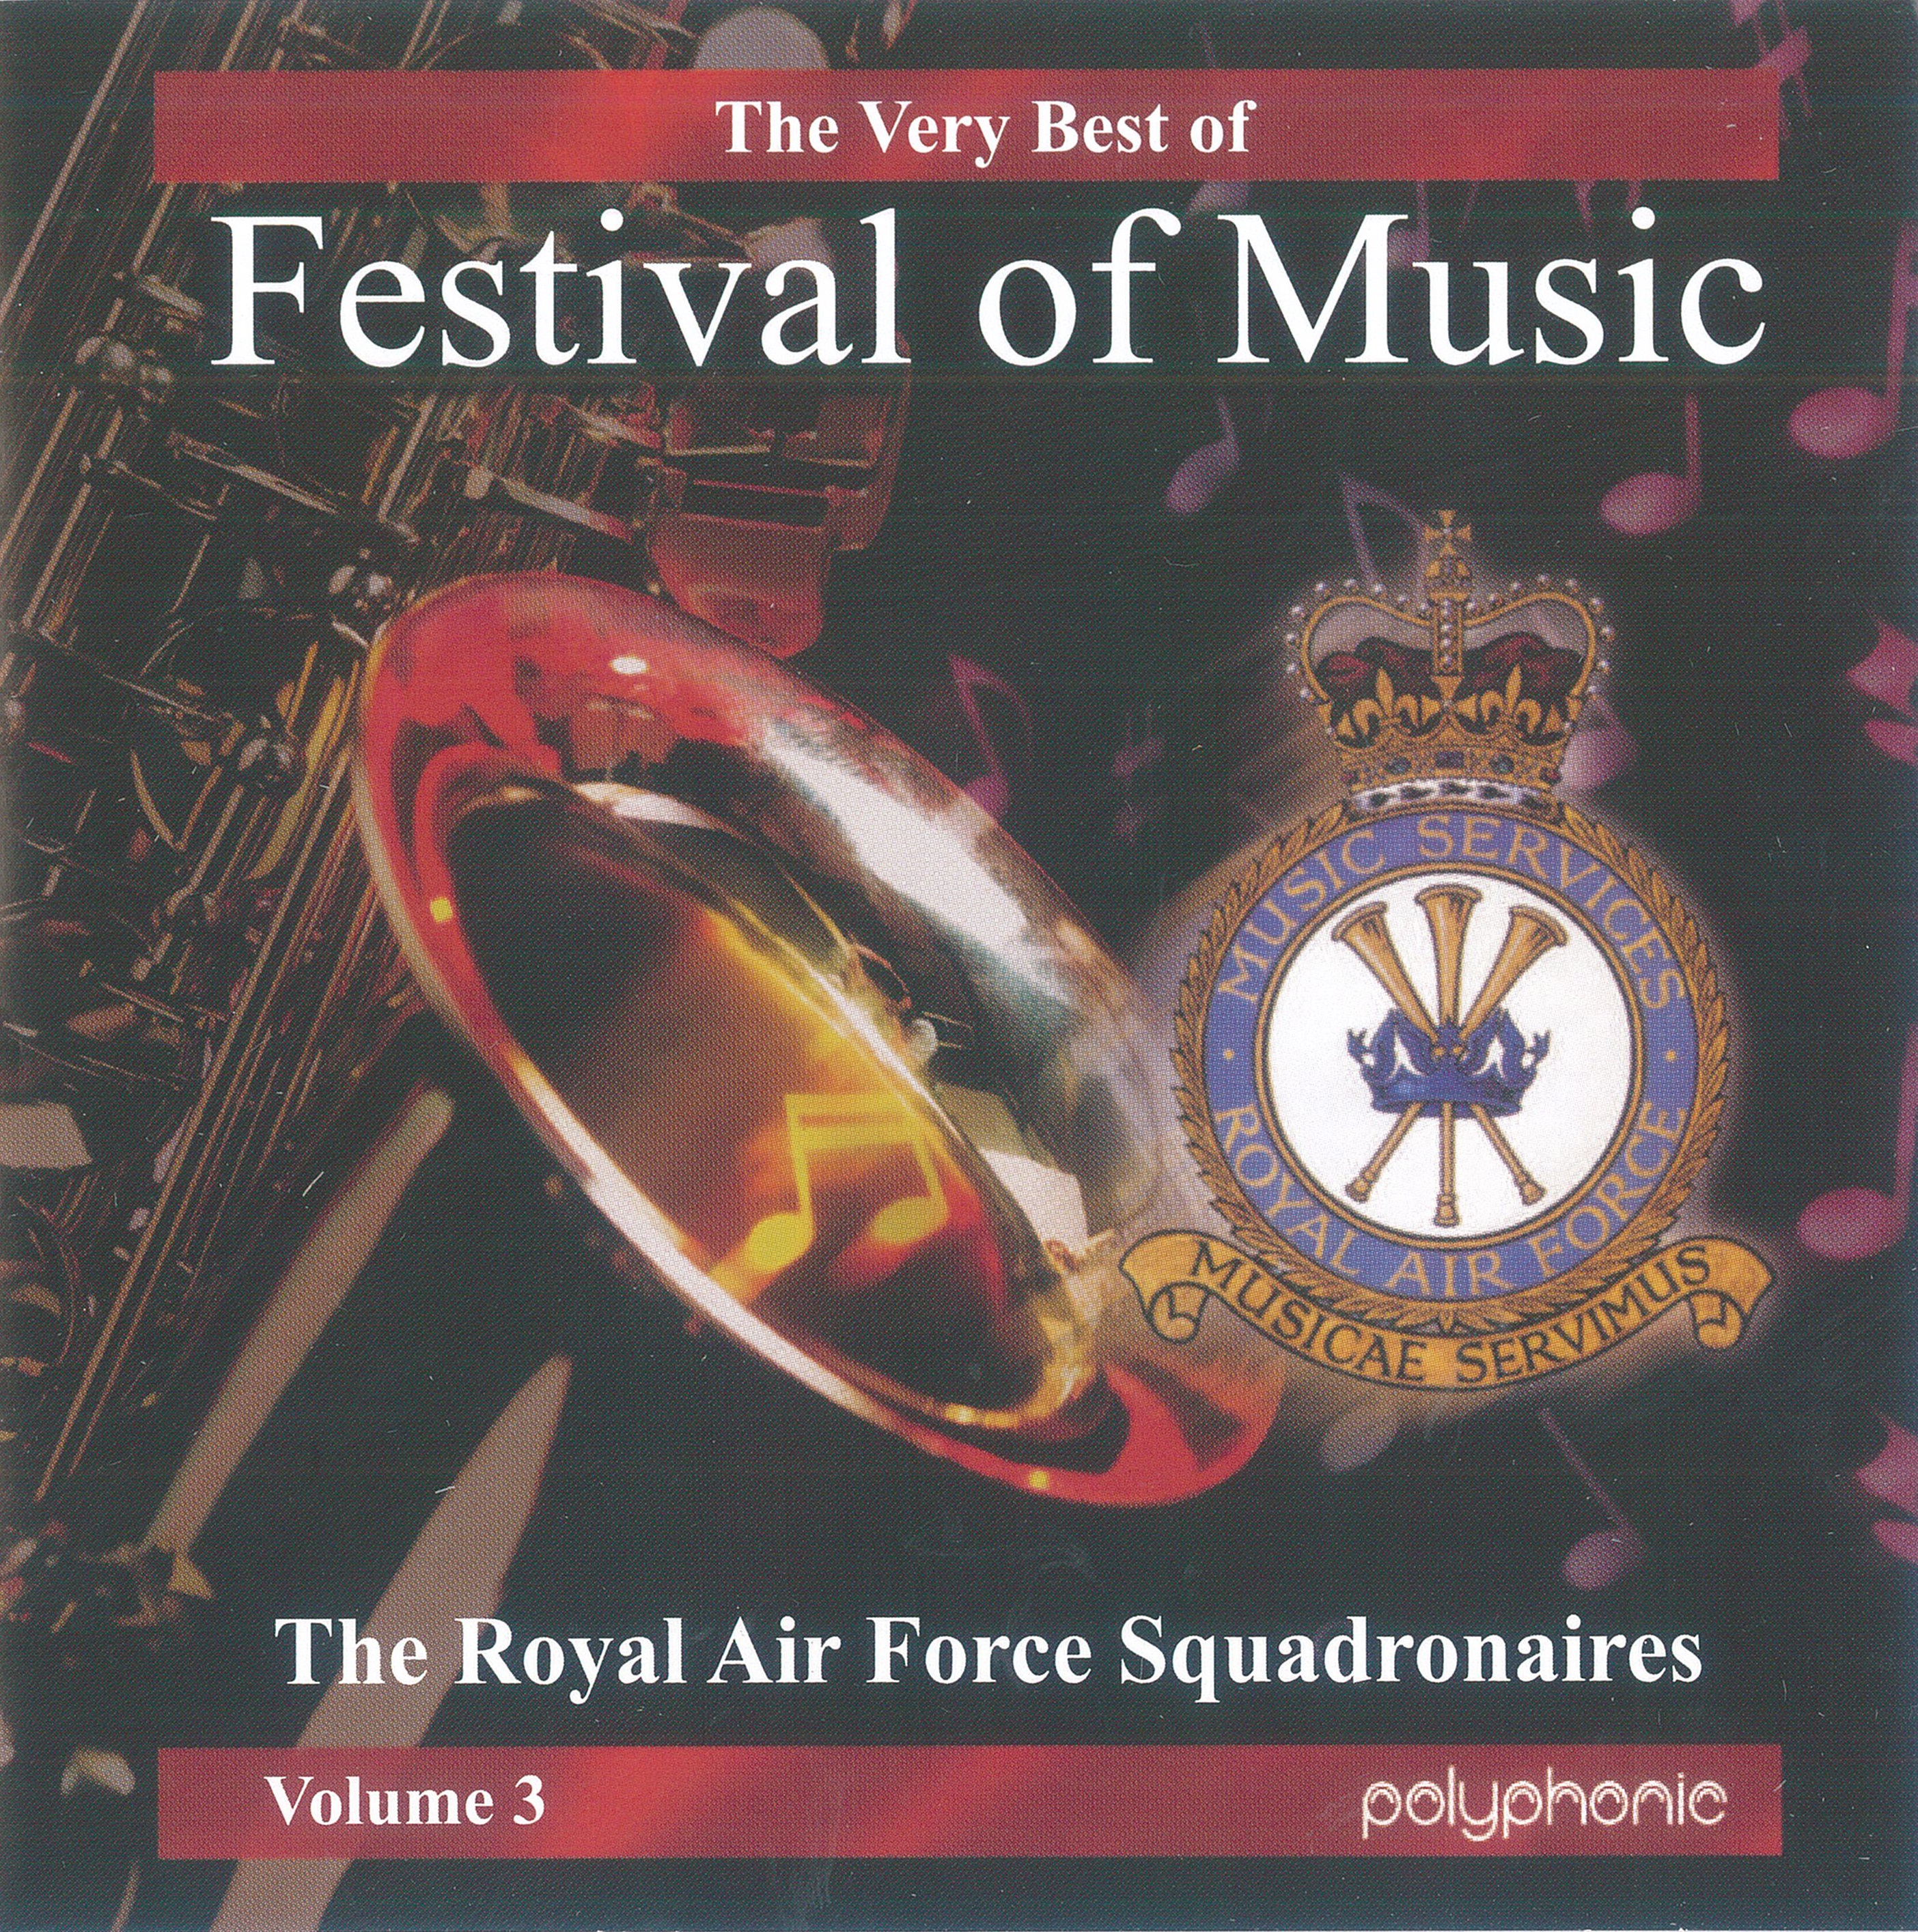 The Very Best of Festival of Music Vol. 3 - CD